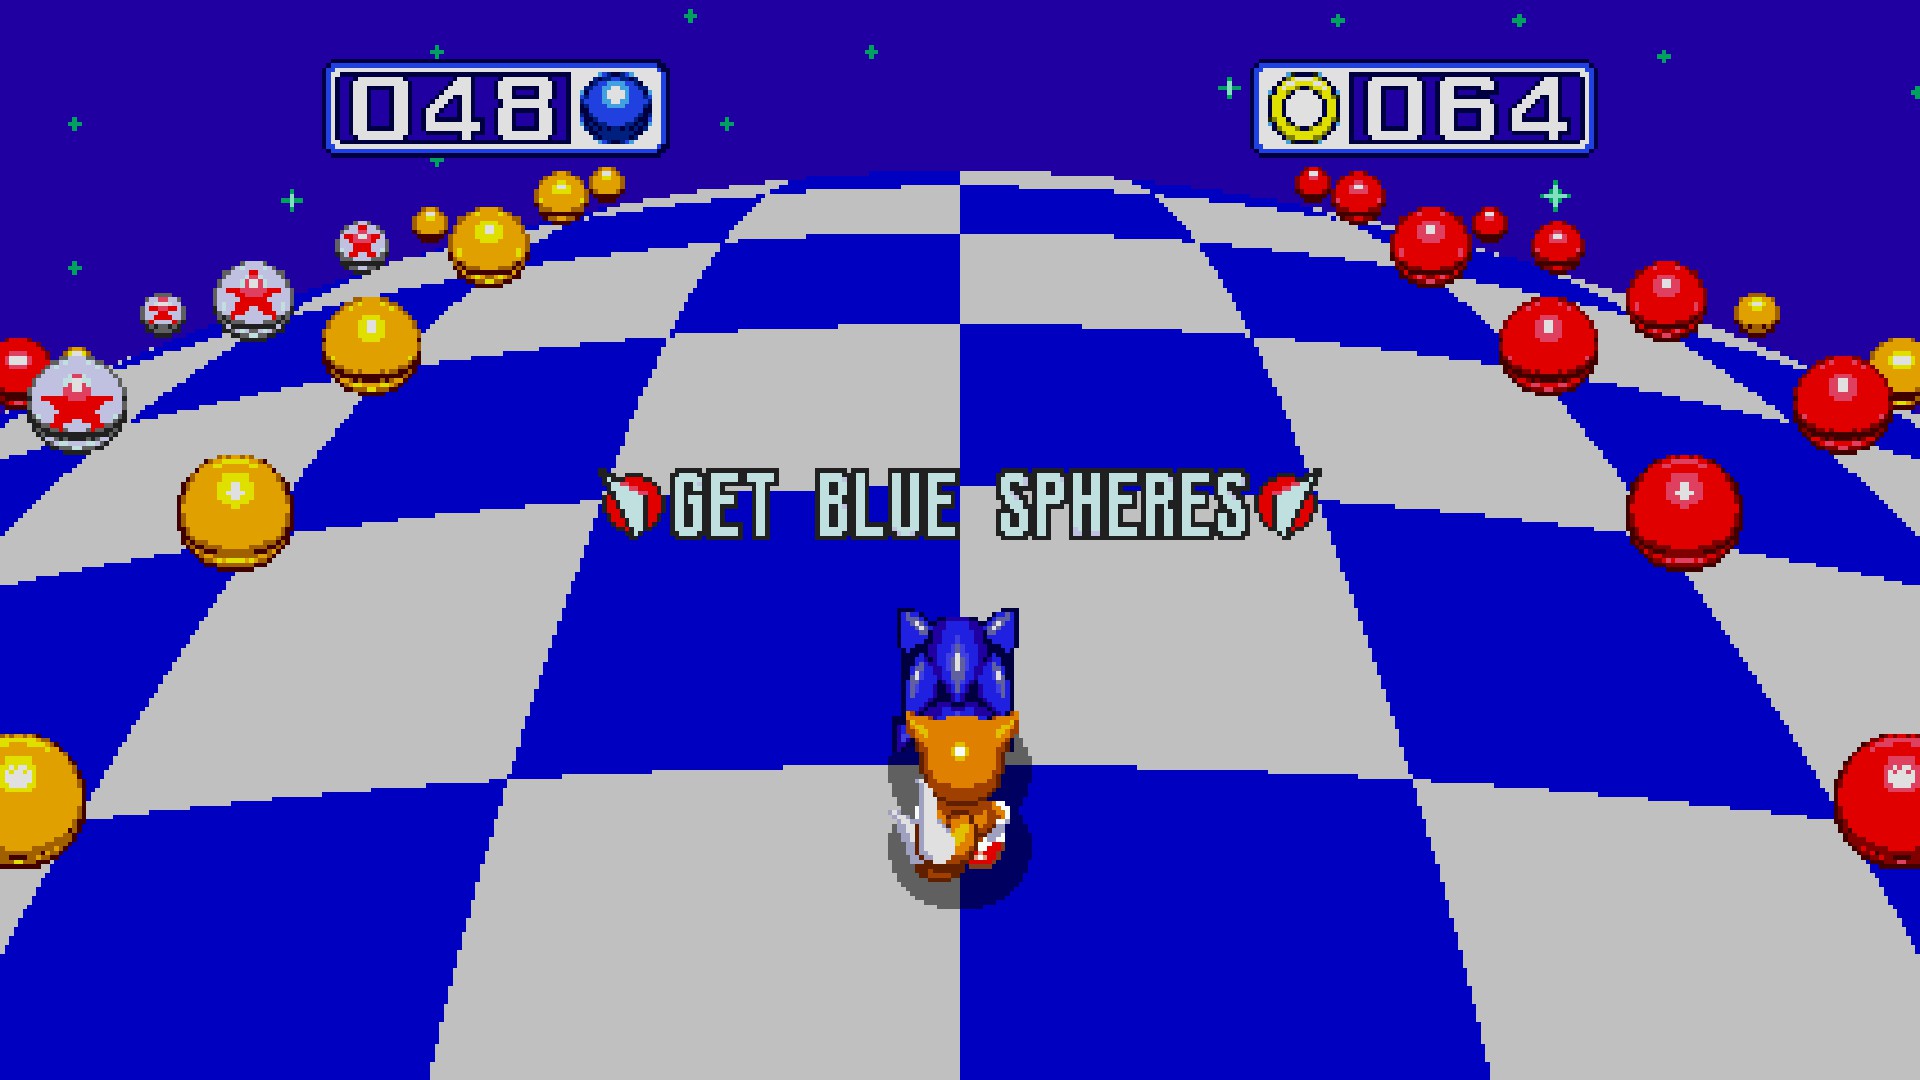 SC Cheats & Glitches: Sonic 3 & Knuckles - Debug & Level Select 